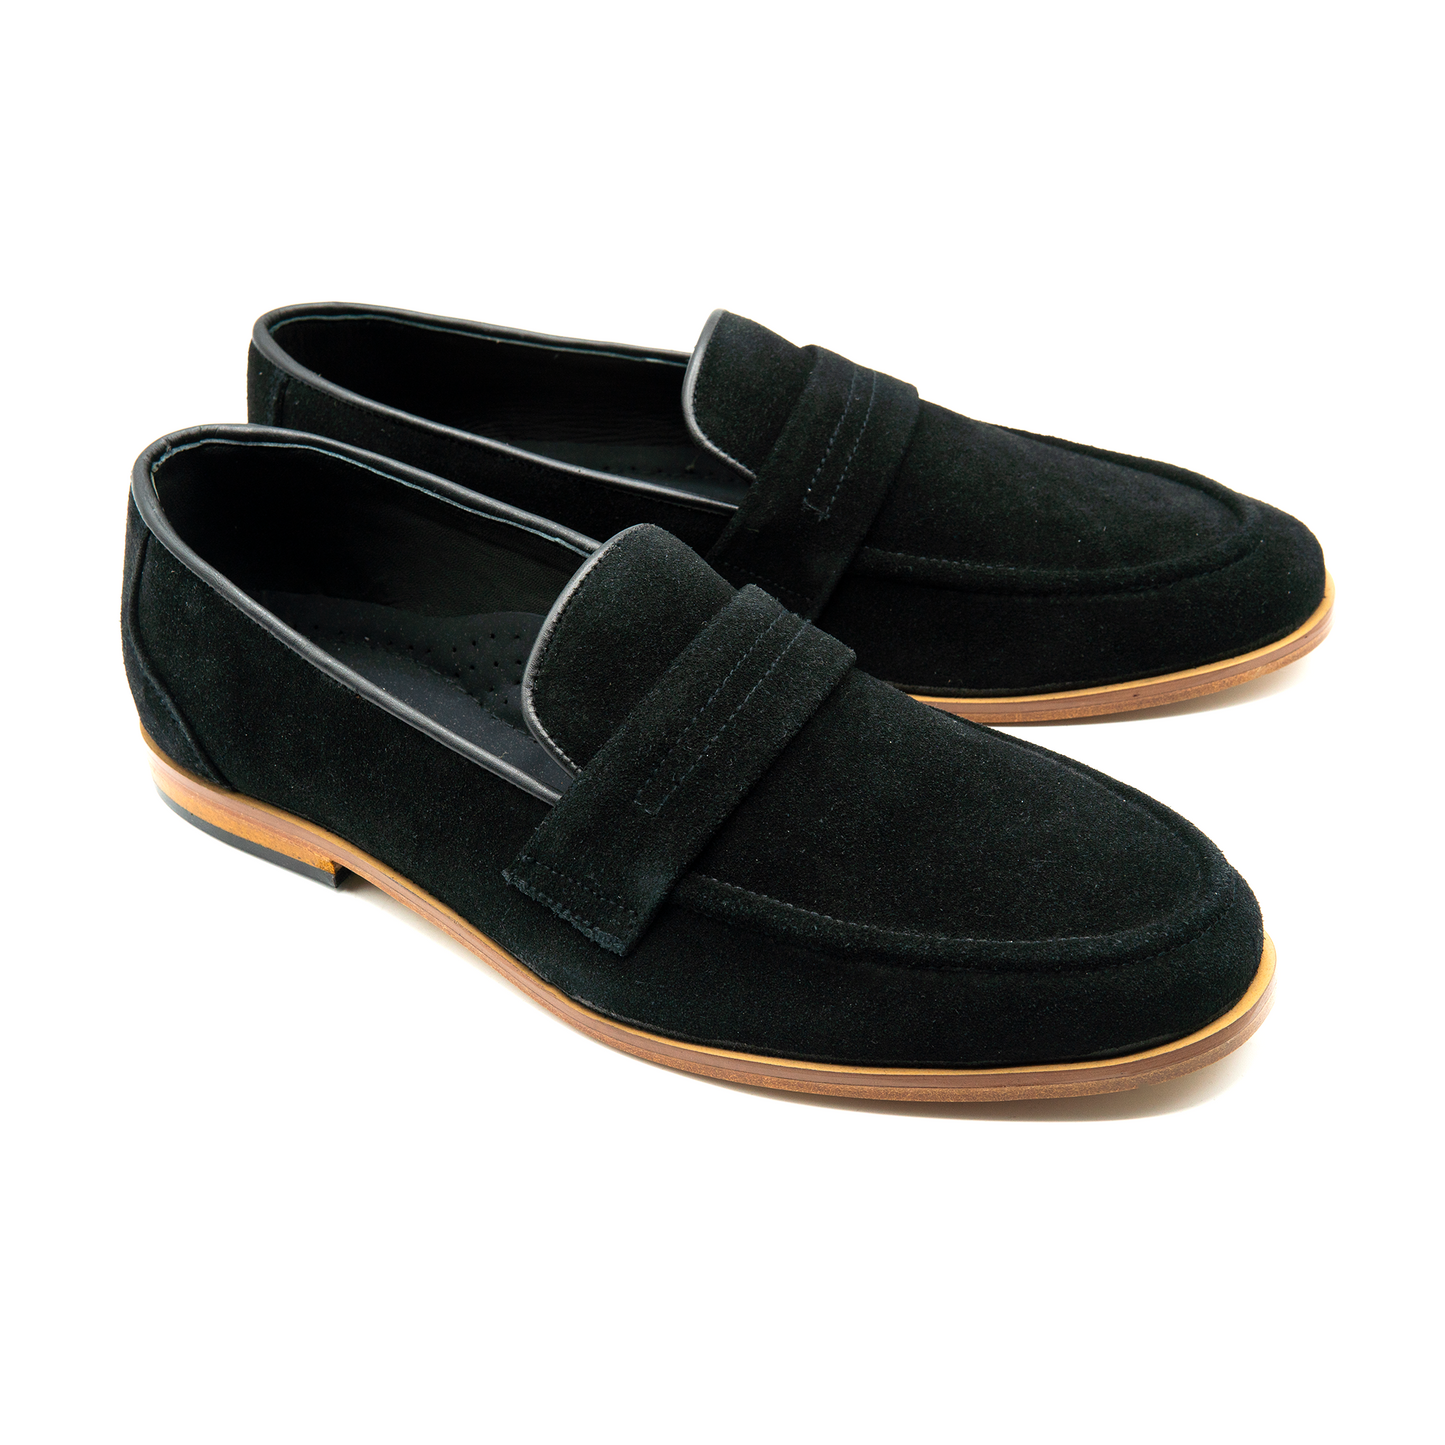 Black Suede Leather Executive Shoes